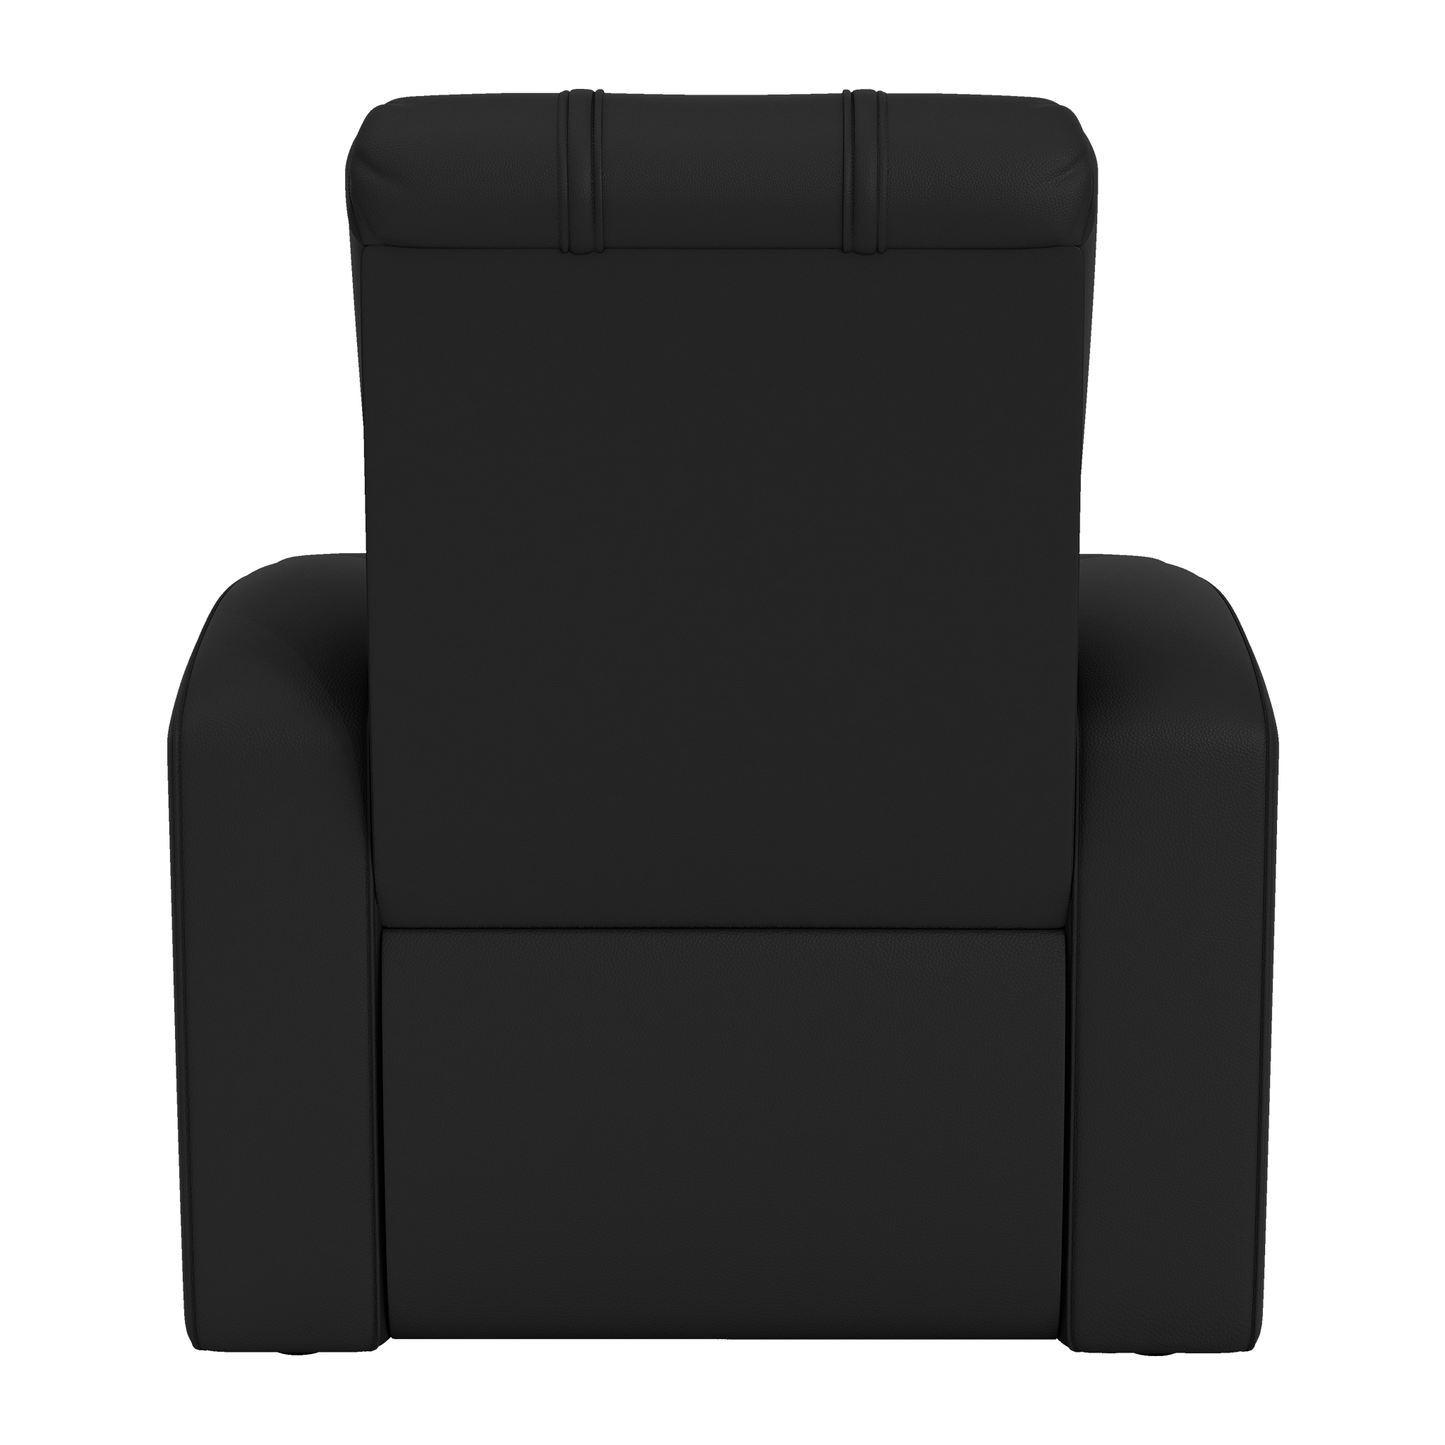 Relax Home Theater Recliner with Arizona State Sundevils Logo